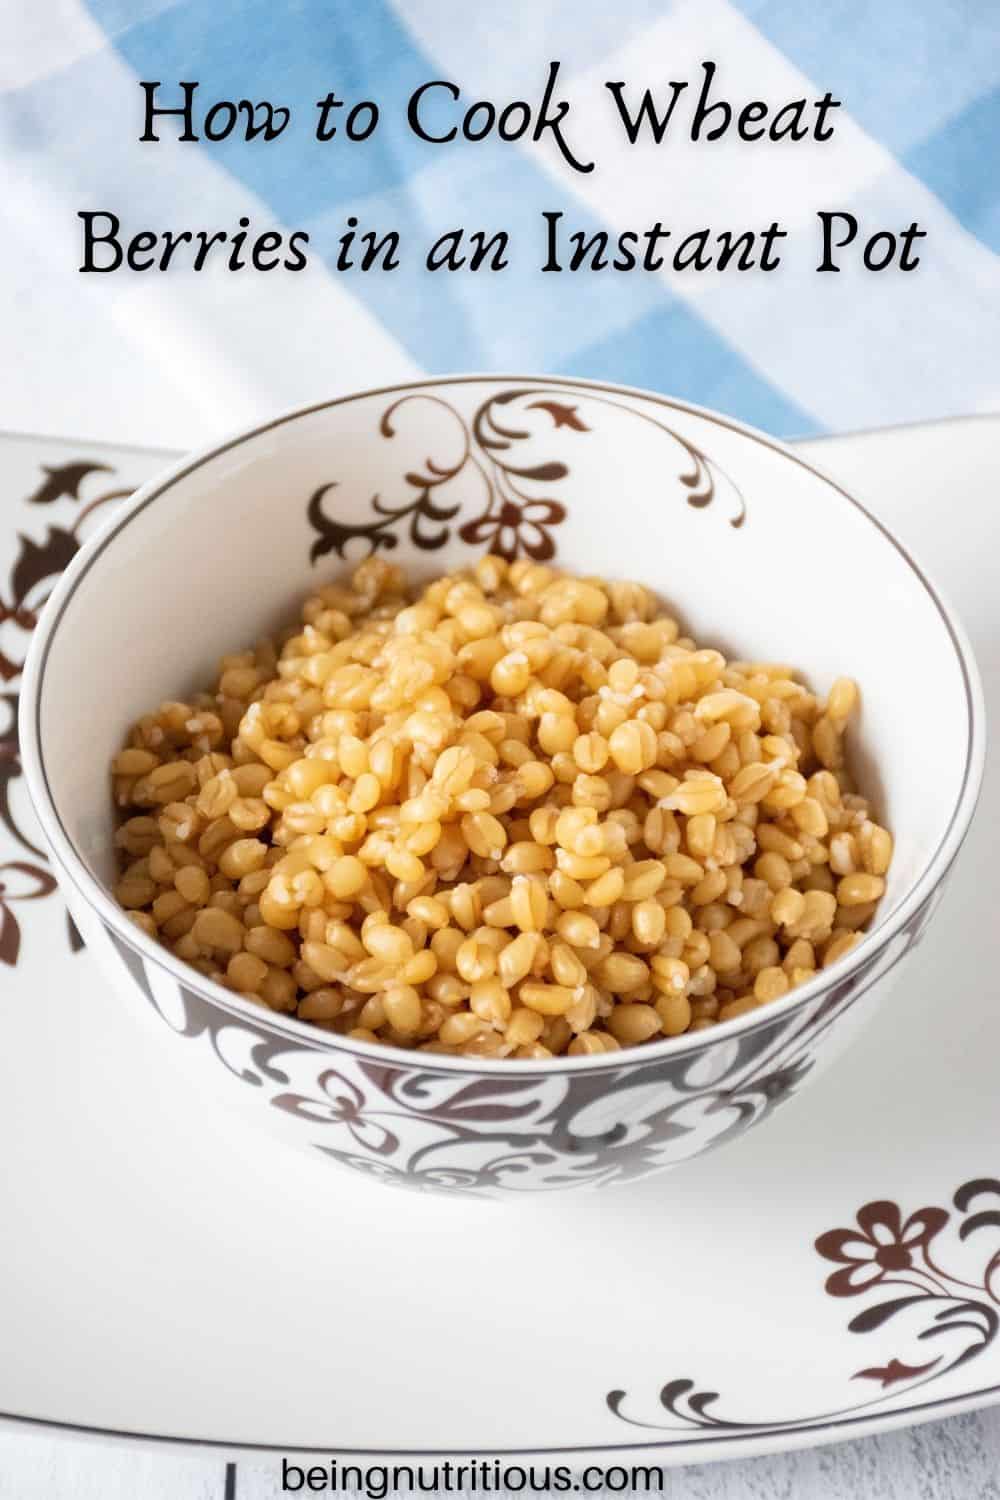 Bowl of cooked wheat berries. Text overlay: How to Cook Wheat Berries in an Instant Pot.